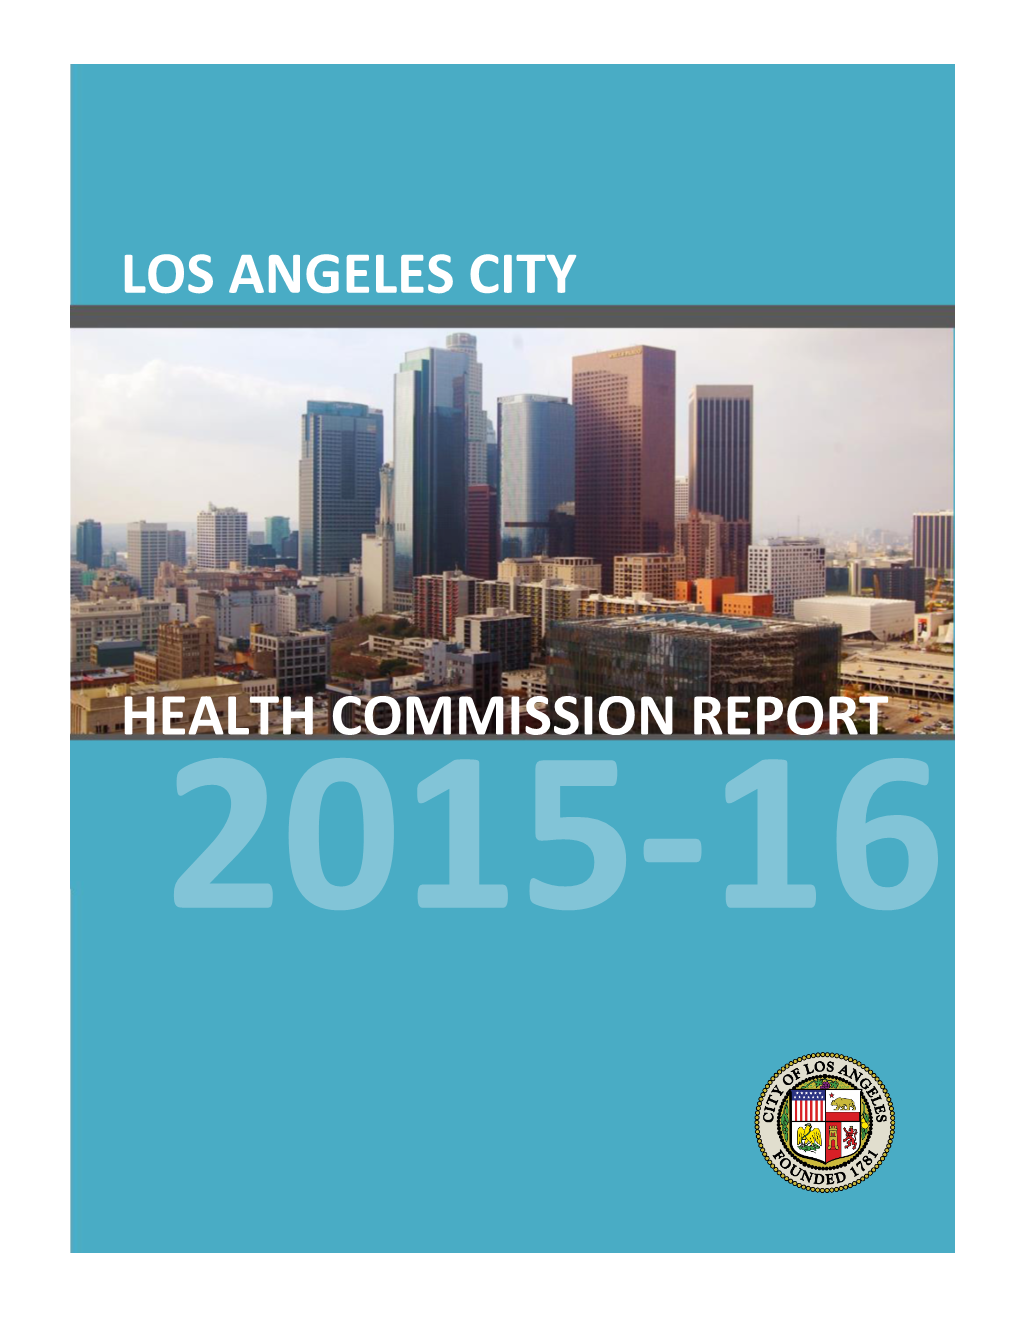 Health Commission Report (2015-2016)